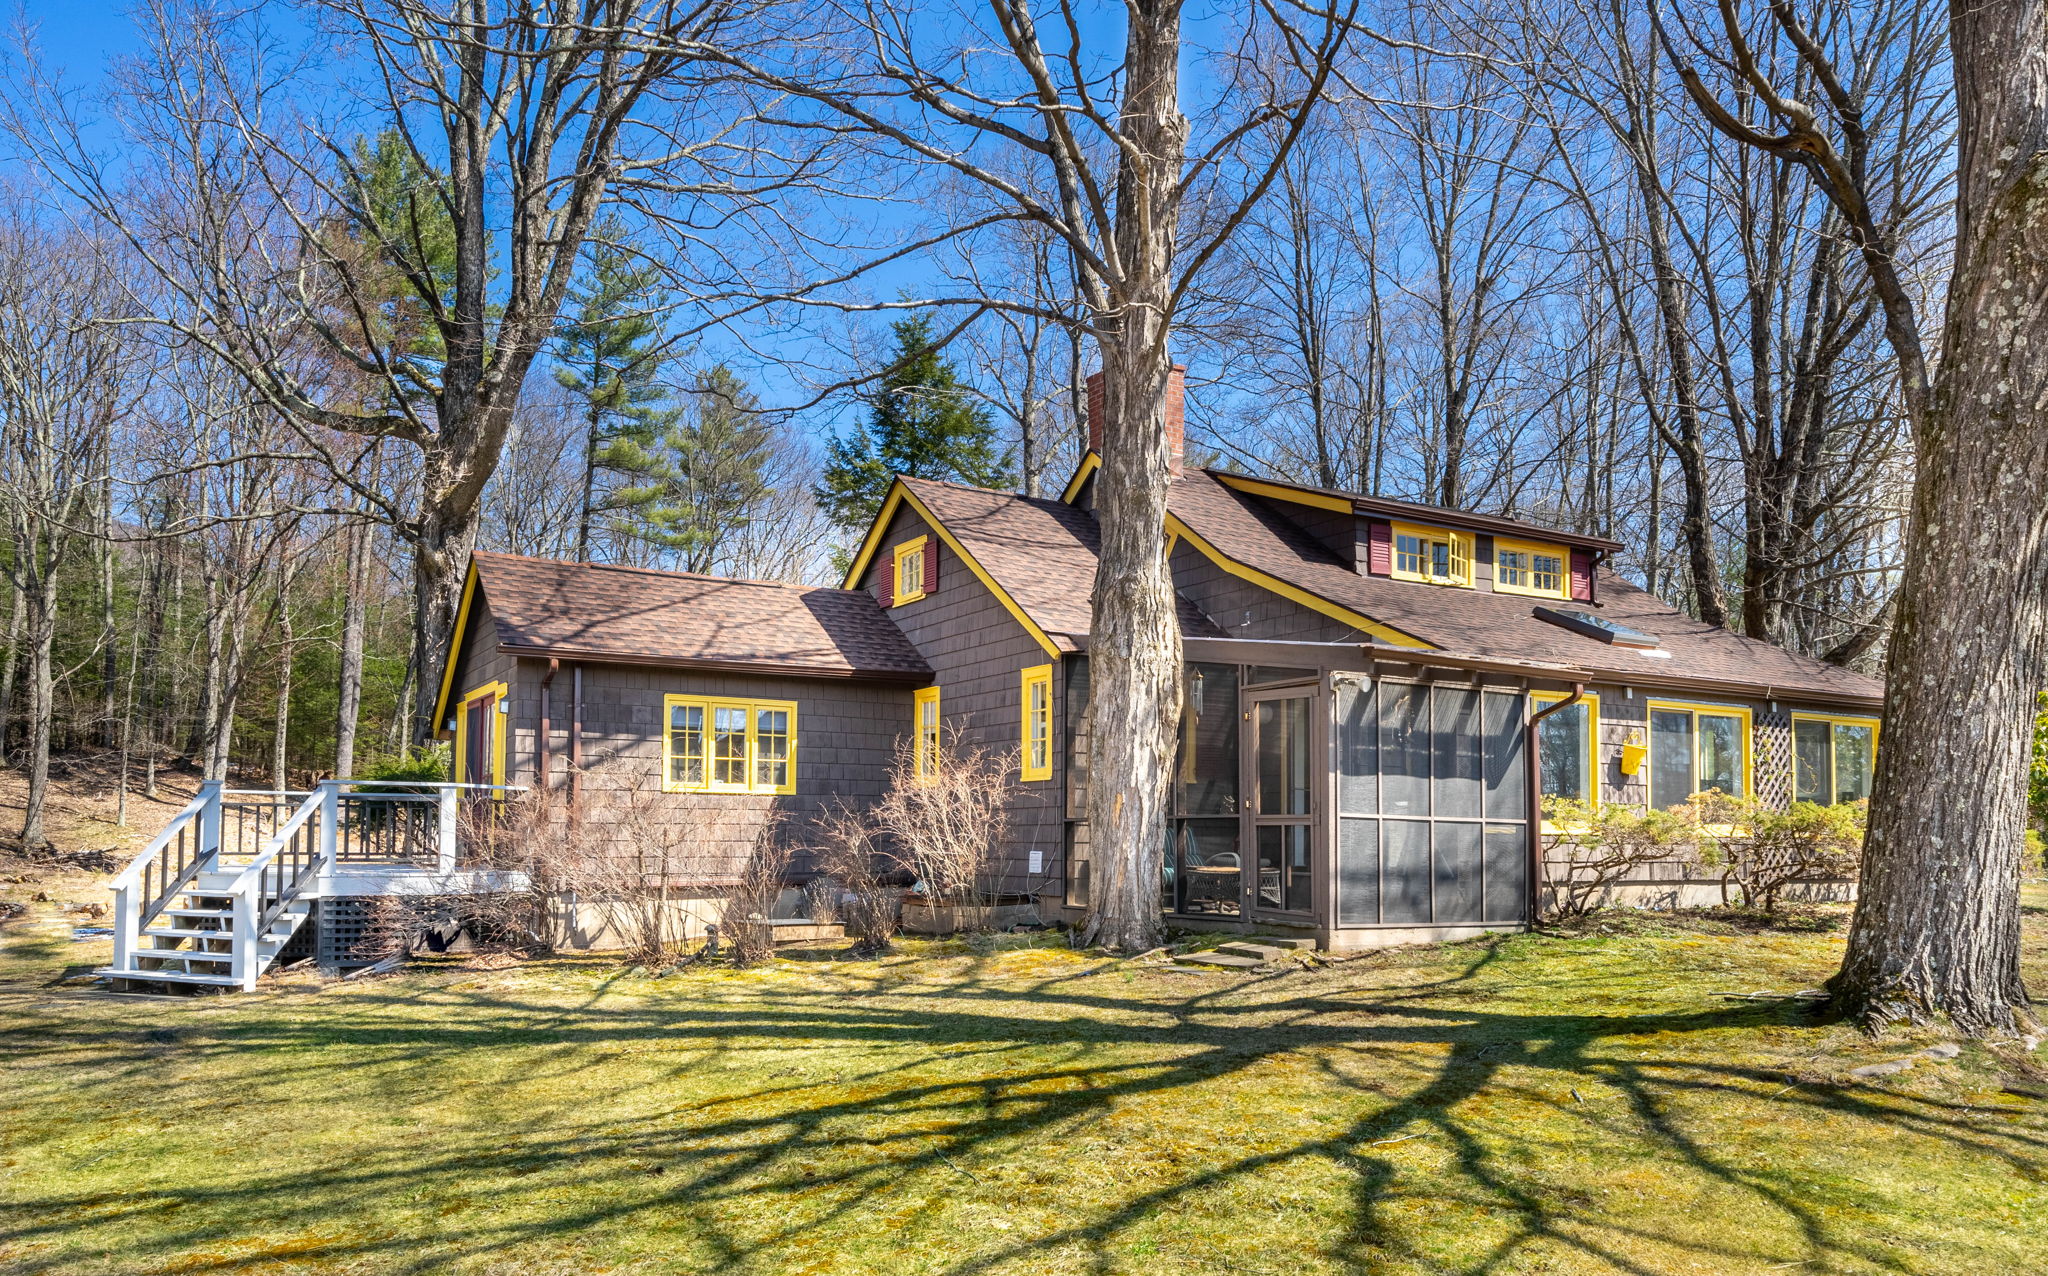  23 Lewis Hollow Rd, Woodstock, NY 12498, US